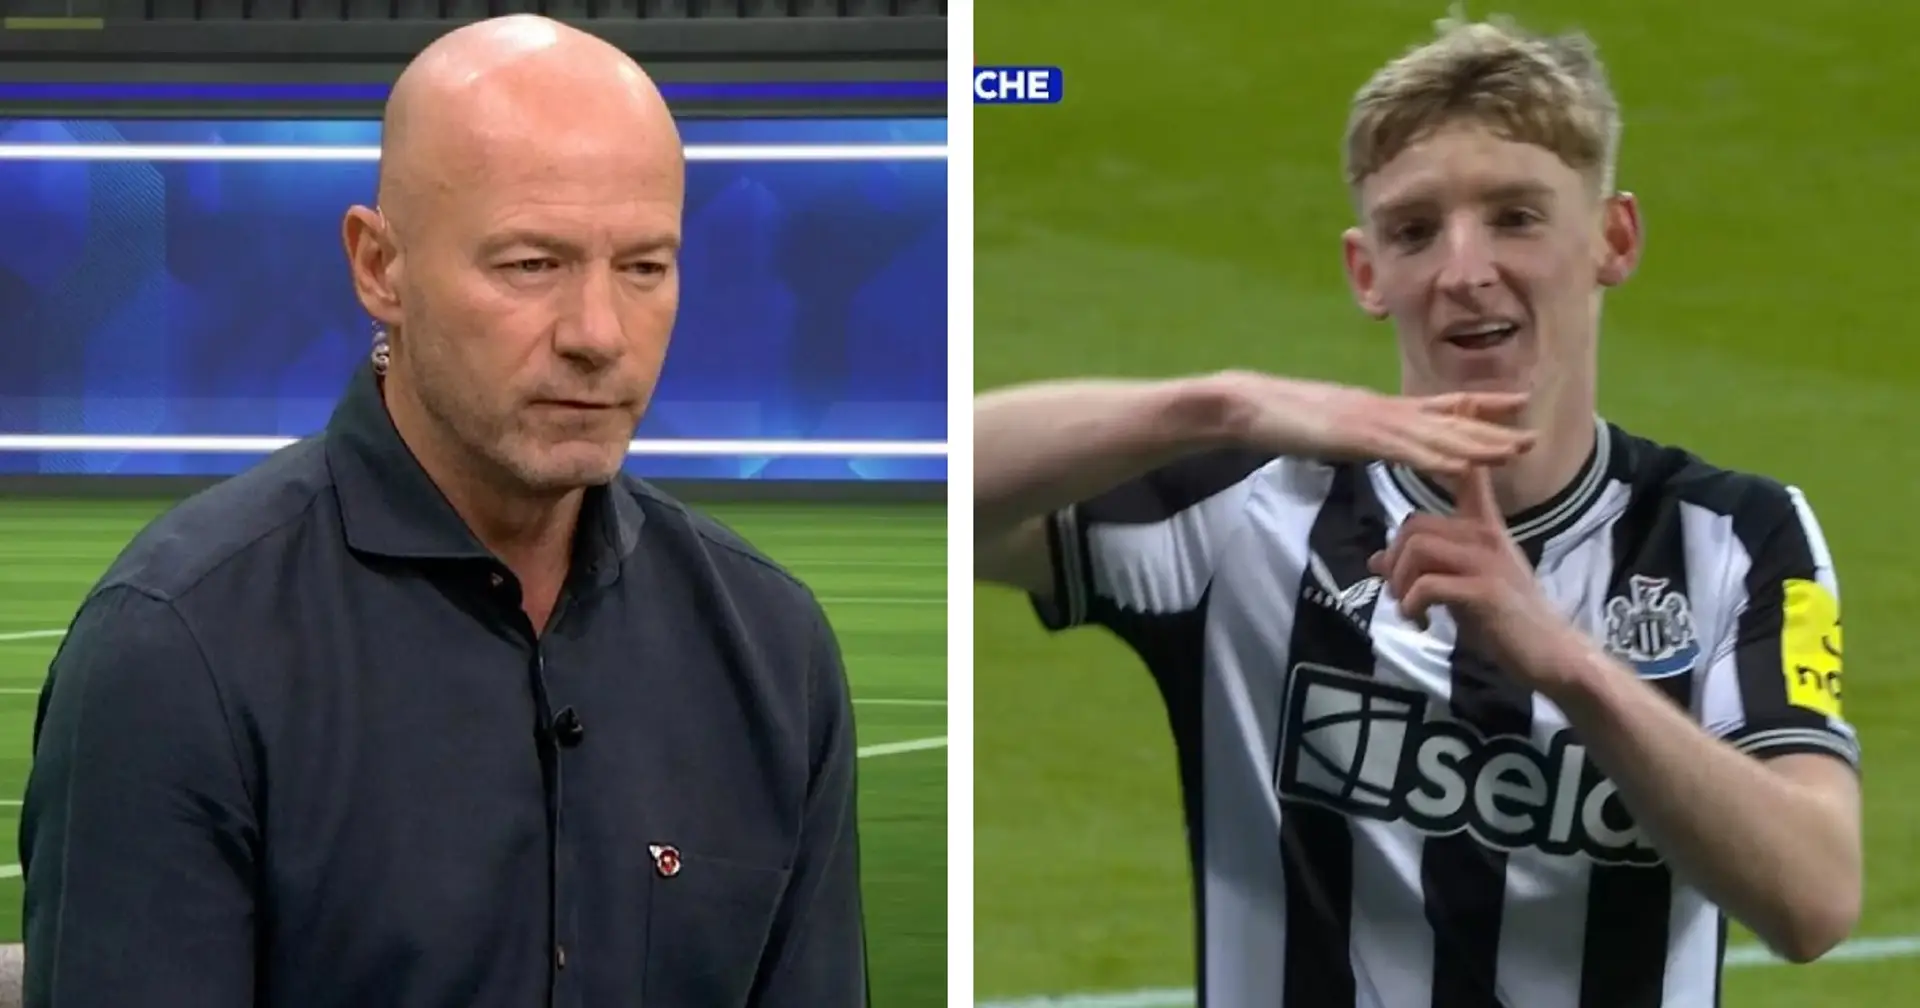 'Gordon gave him a tough time': Shearer names one player who struggled in terrible Chelsea performance